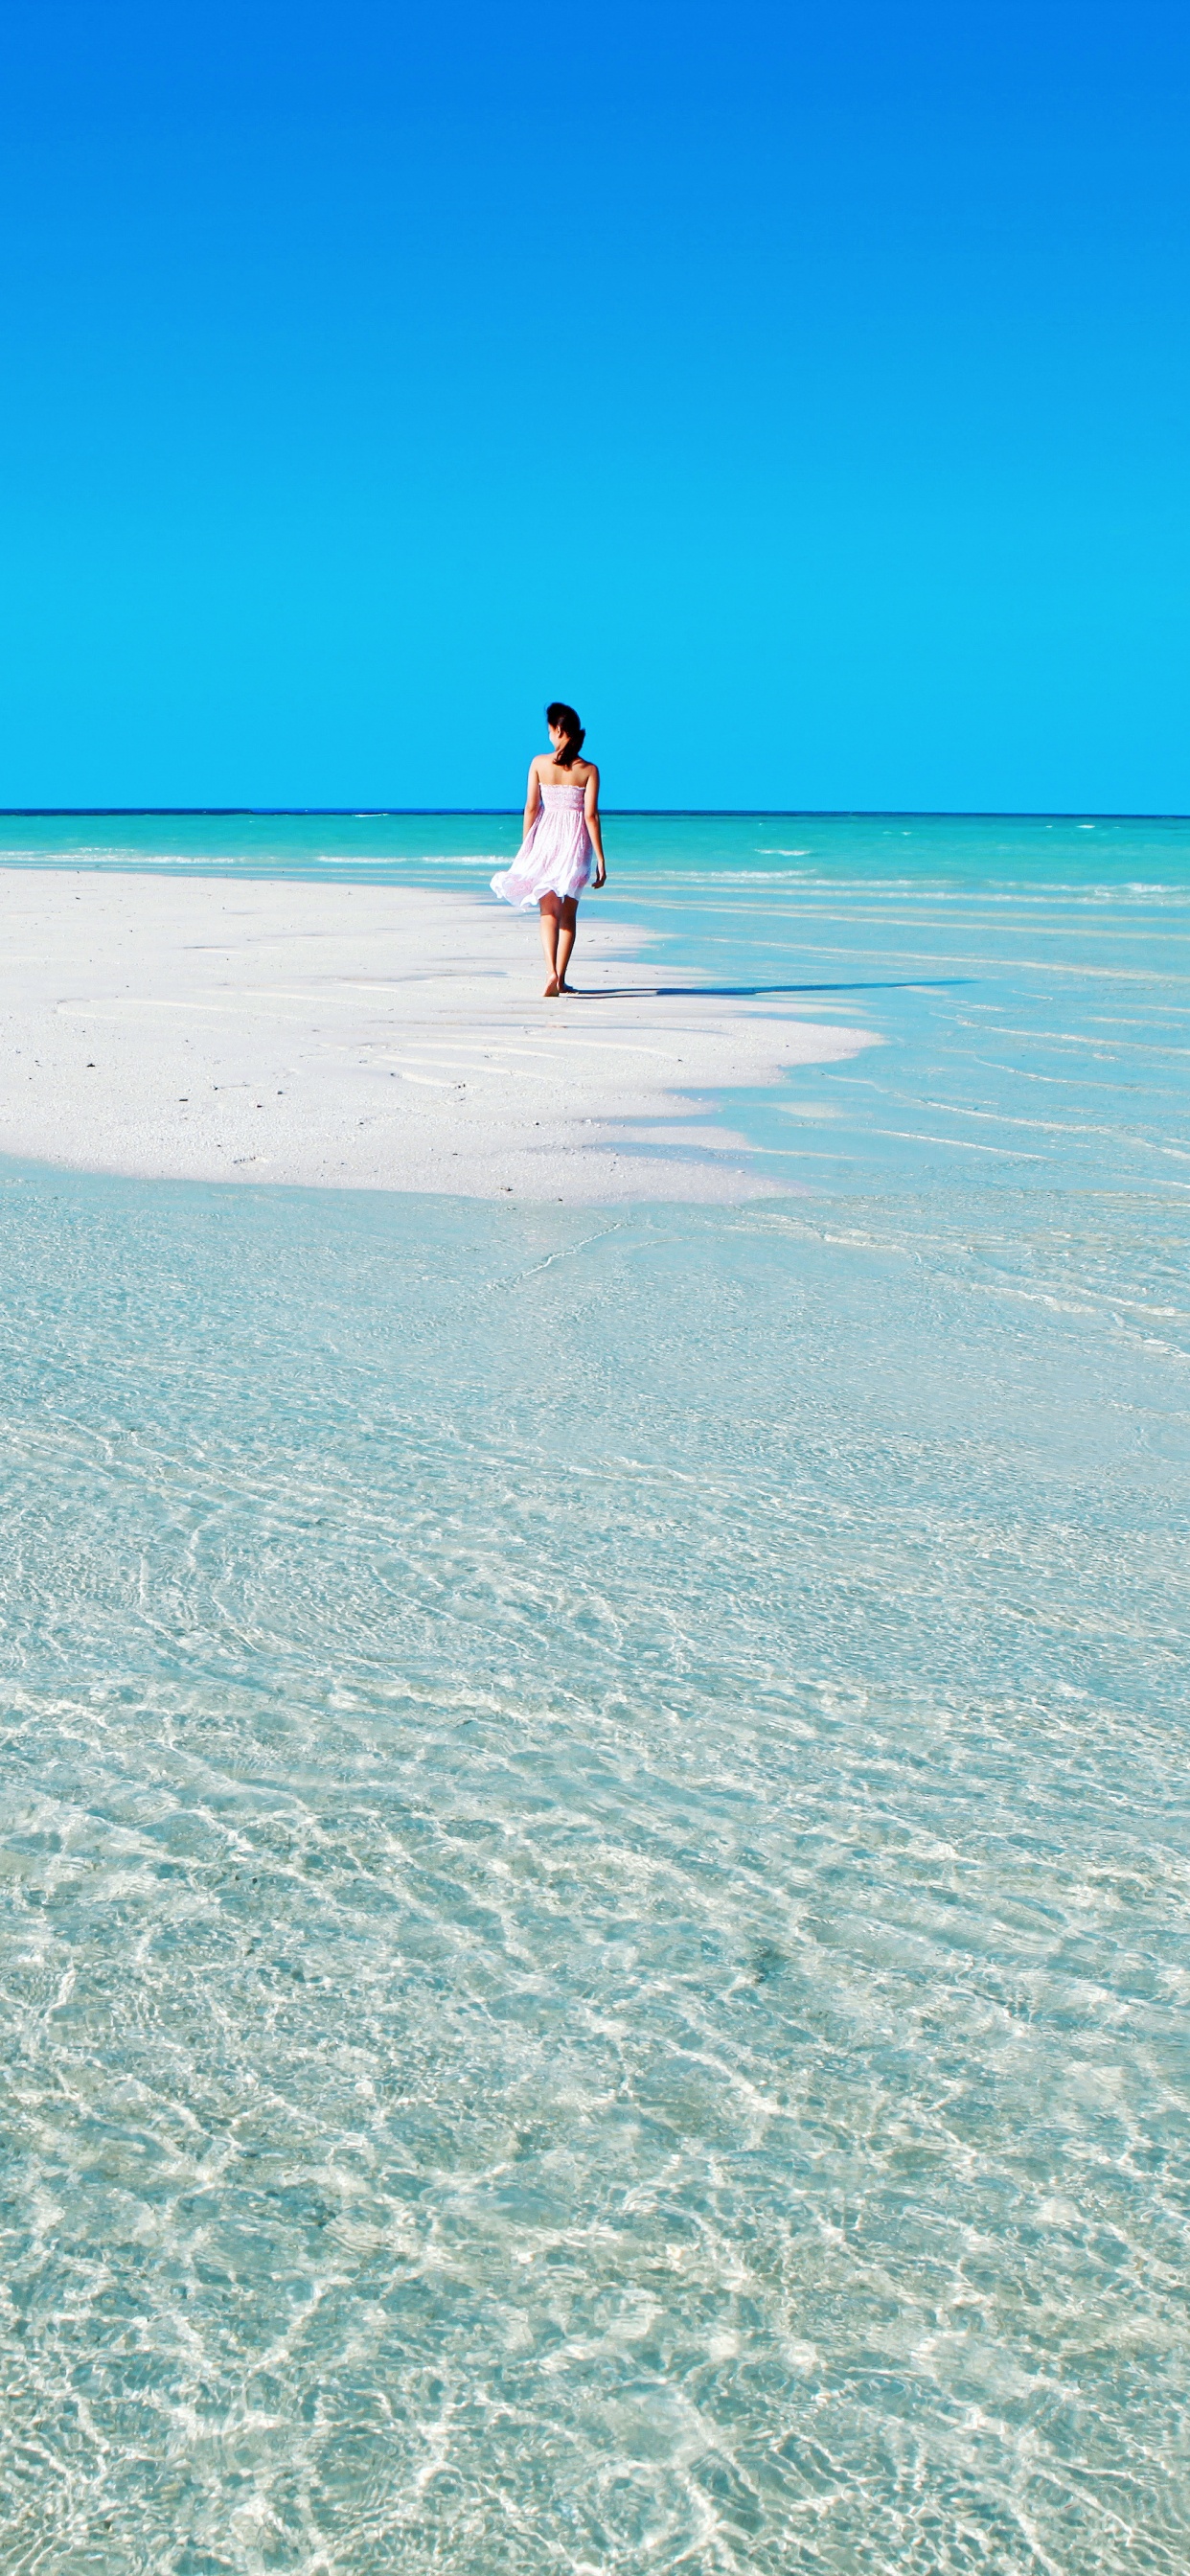 Woman in White Shirt Walking on Beach During Daytime. Wallpaper in 1242x2688 Resolution